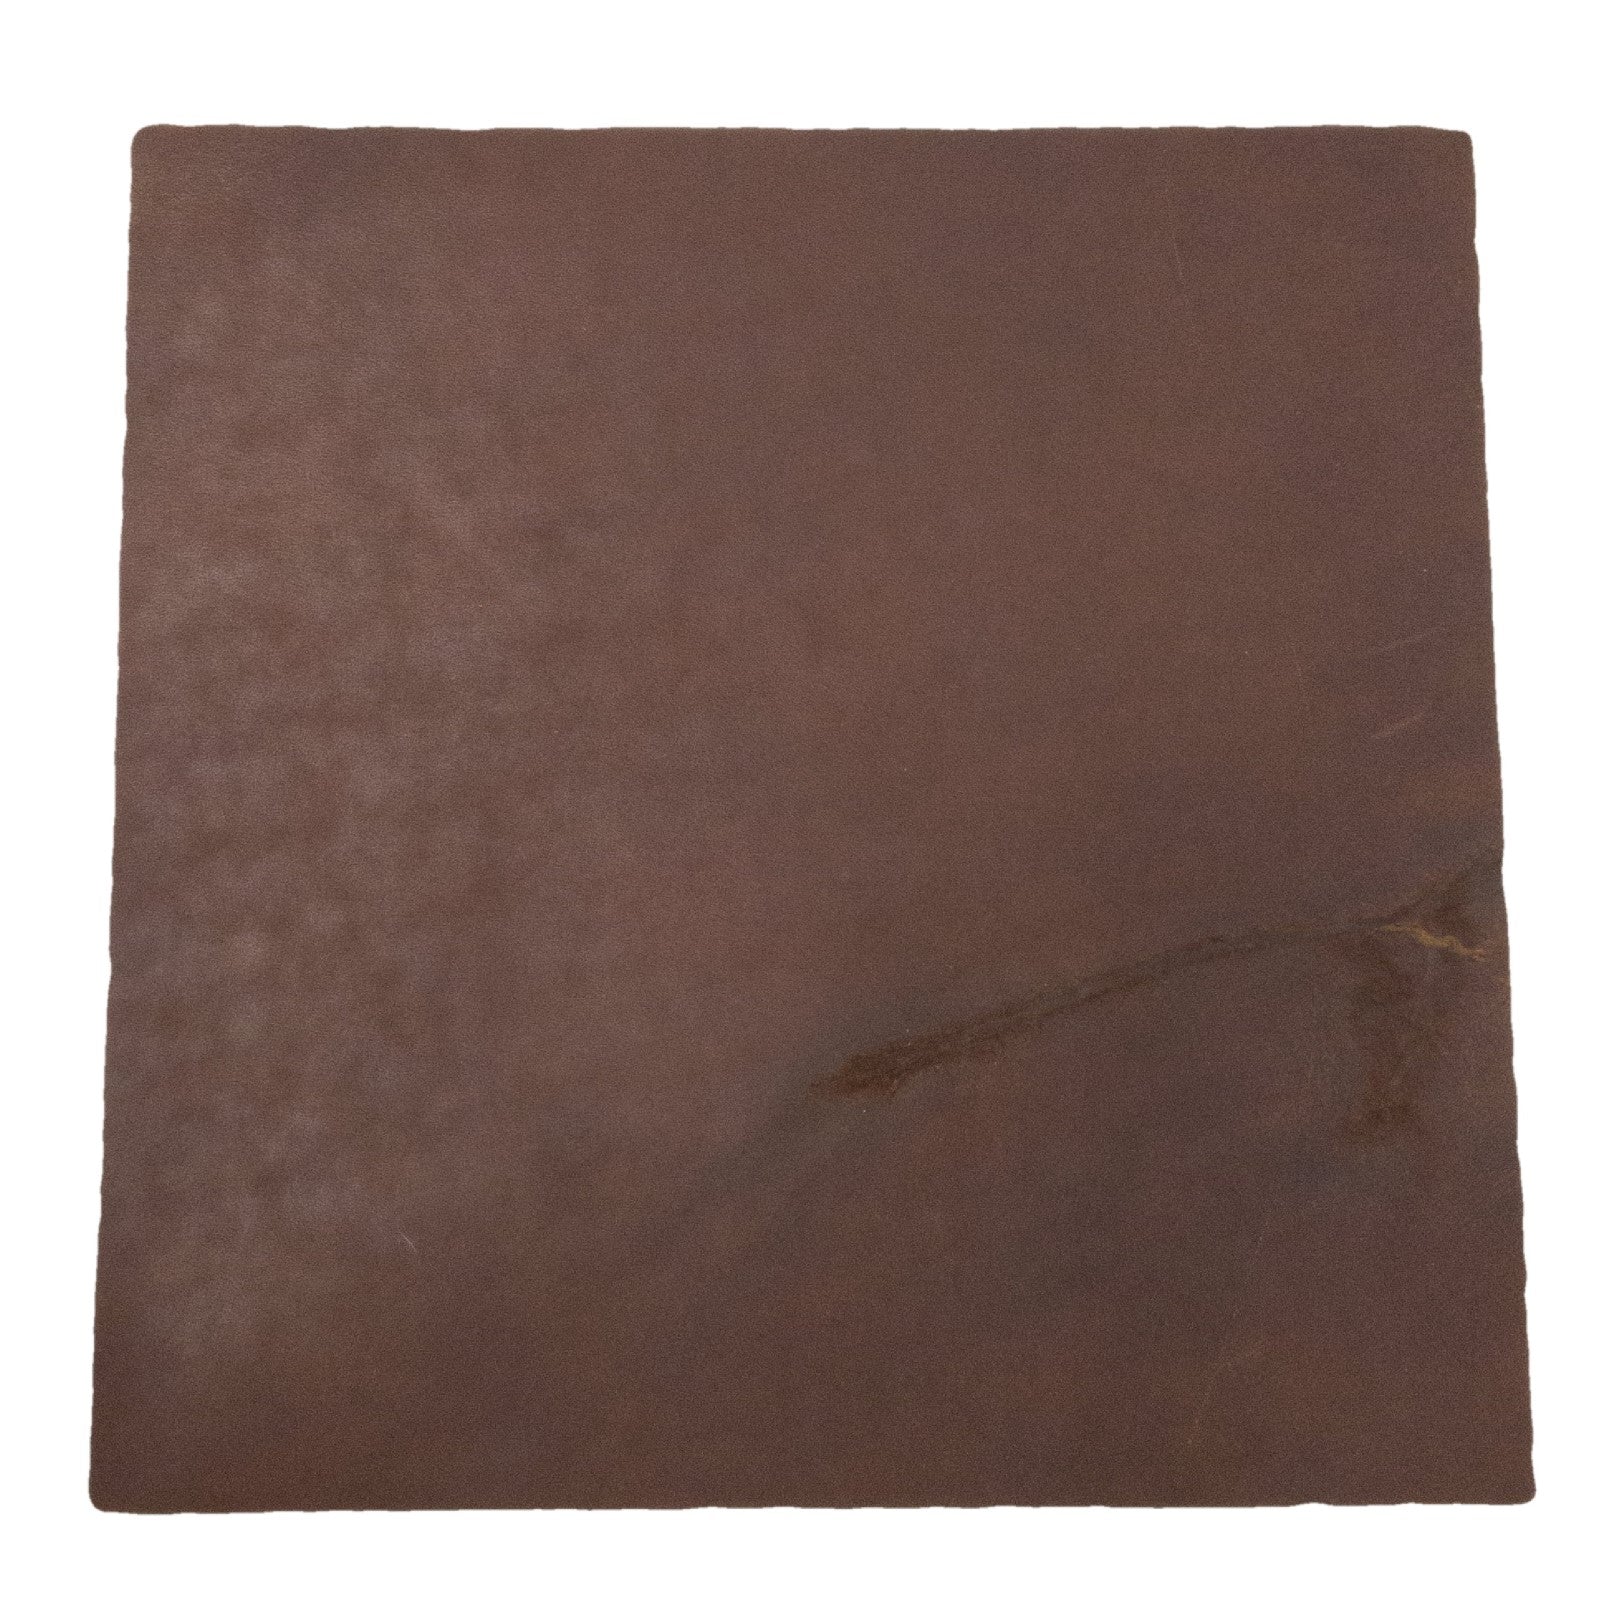 Grunge Branded Pre-cuts, 5-6 oz Oil Tan, Limited Stock Pre-cuts, 7 (12"x12") Sillero (Amber) | The Leather Guy